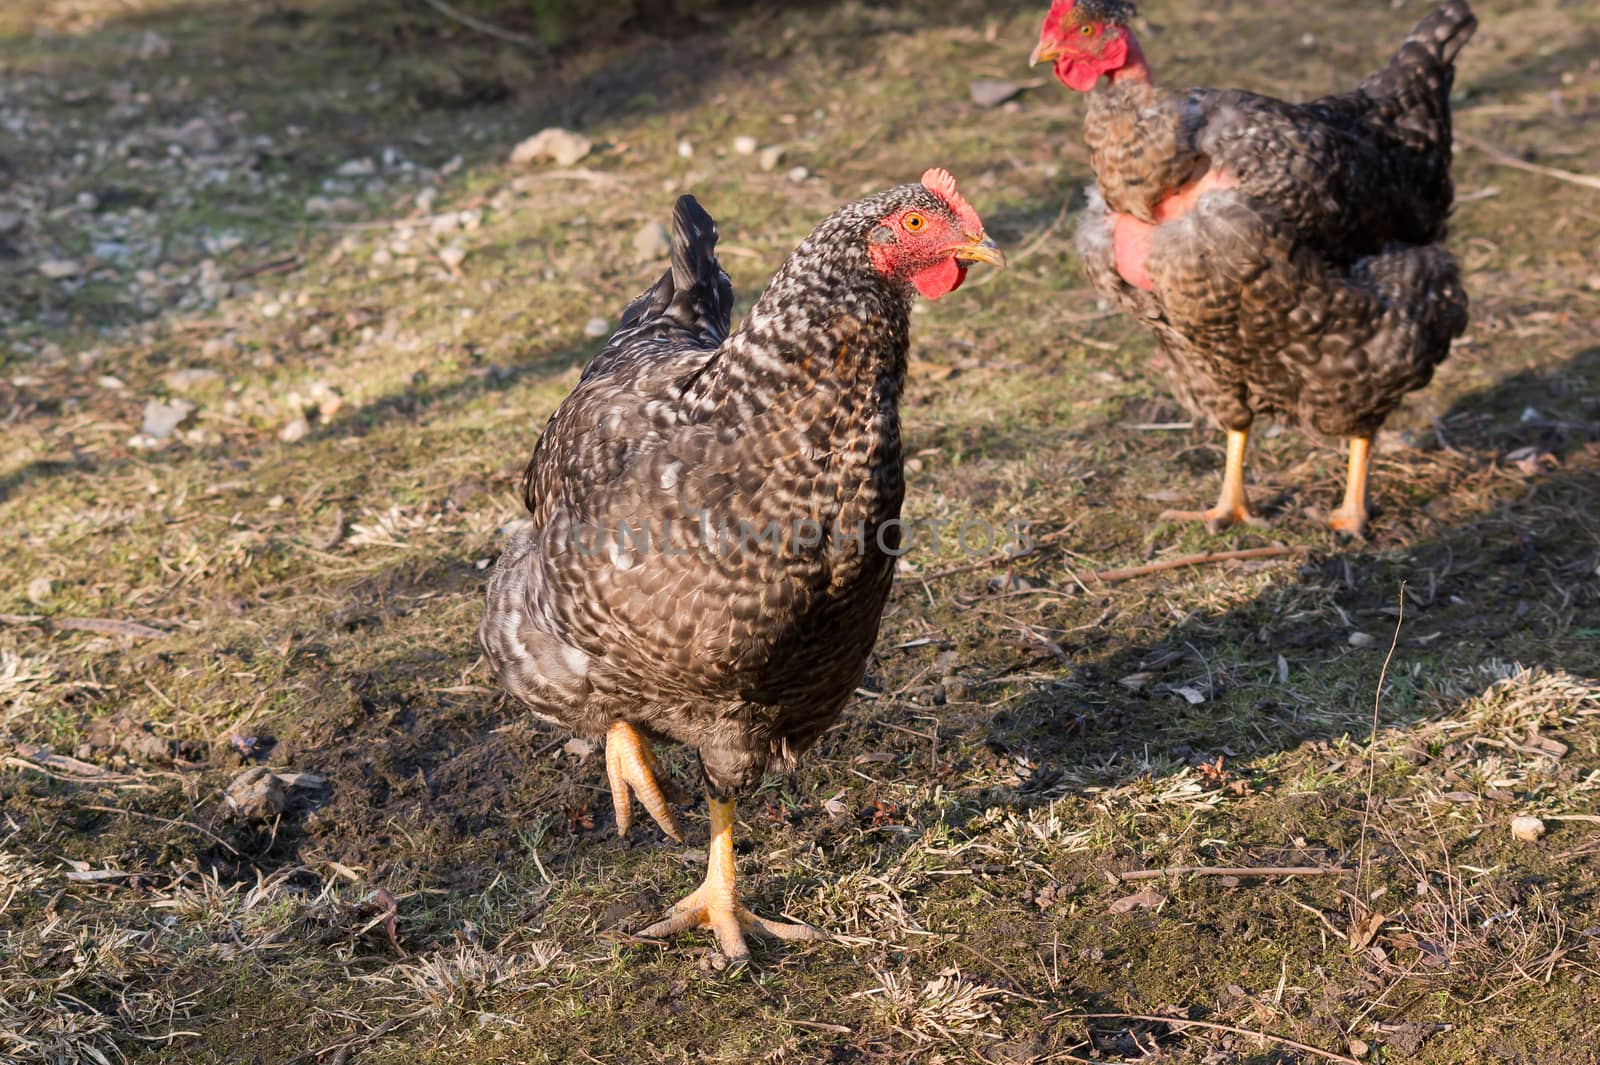 Speckled hens. by dadalia